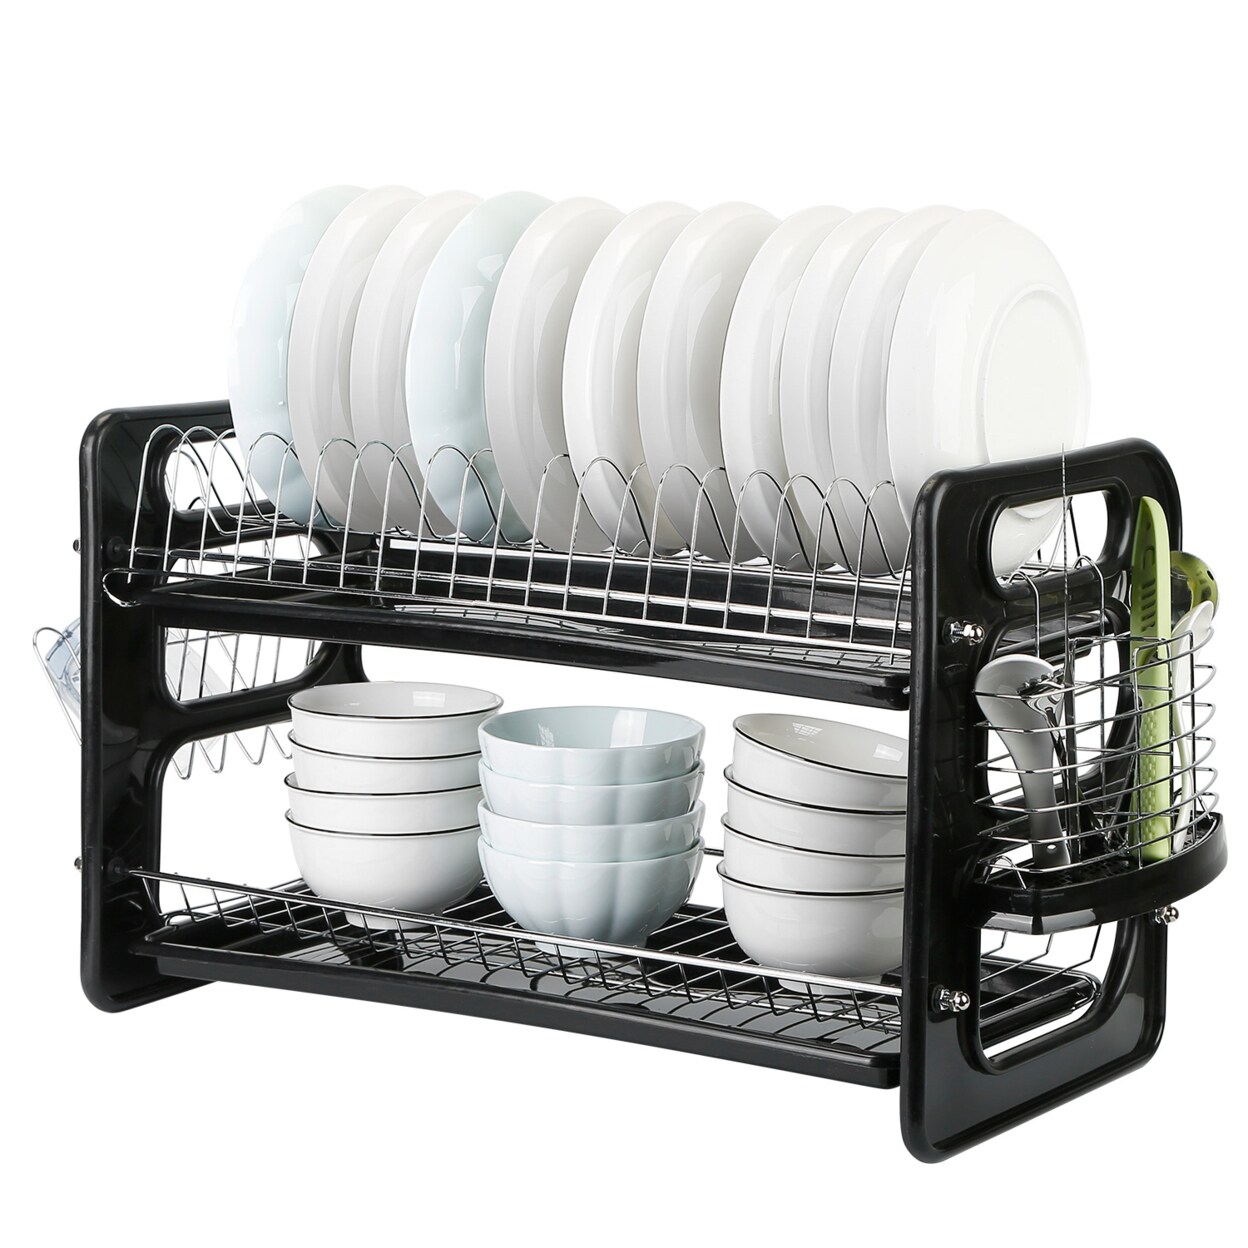 Metal Cup Drying Rack with Draining Tray, White, KITCHEN ORGANIZATION